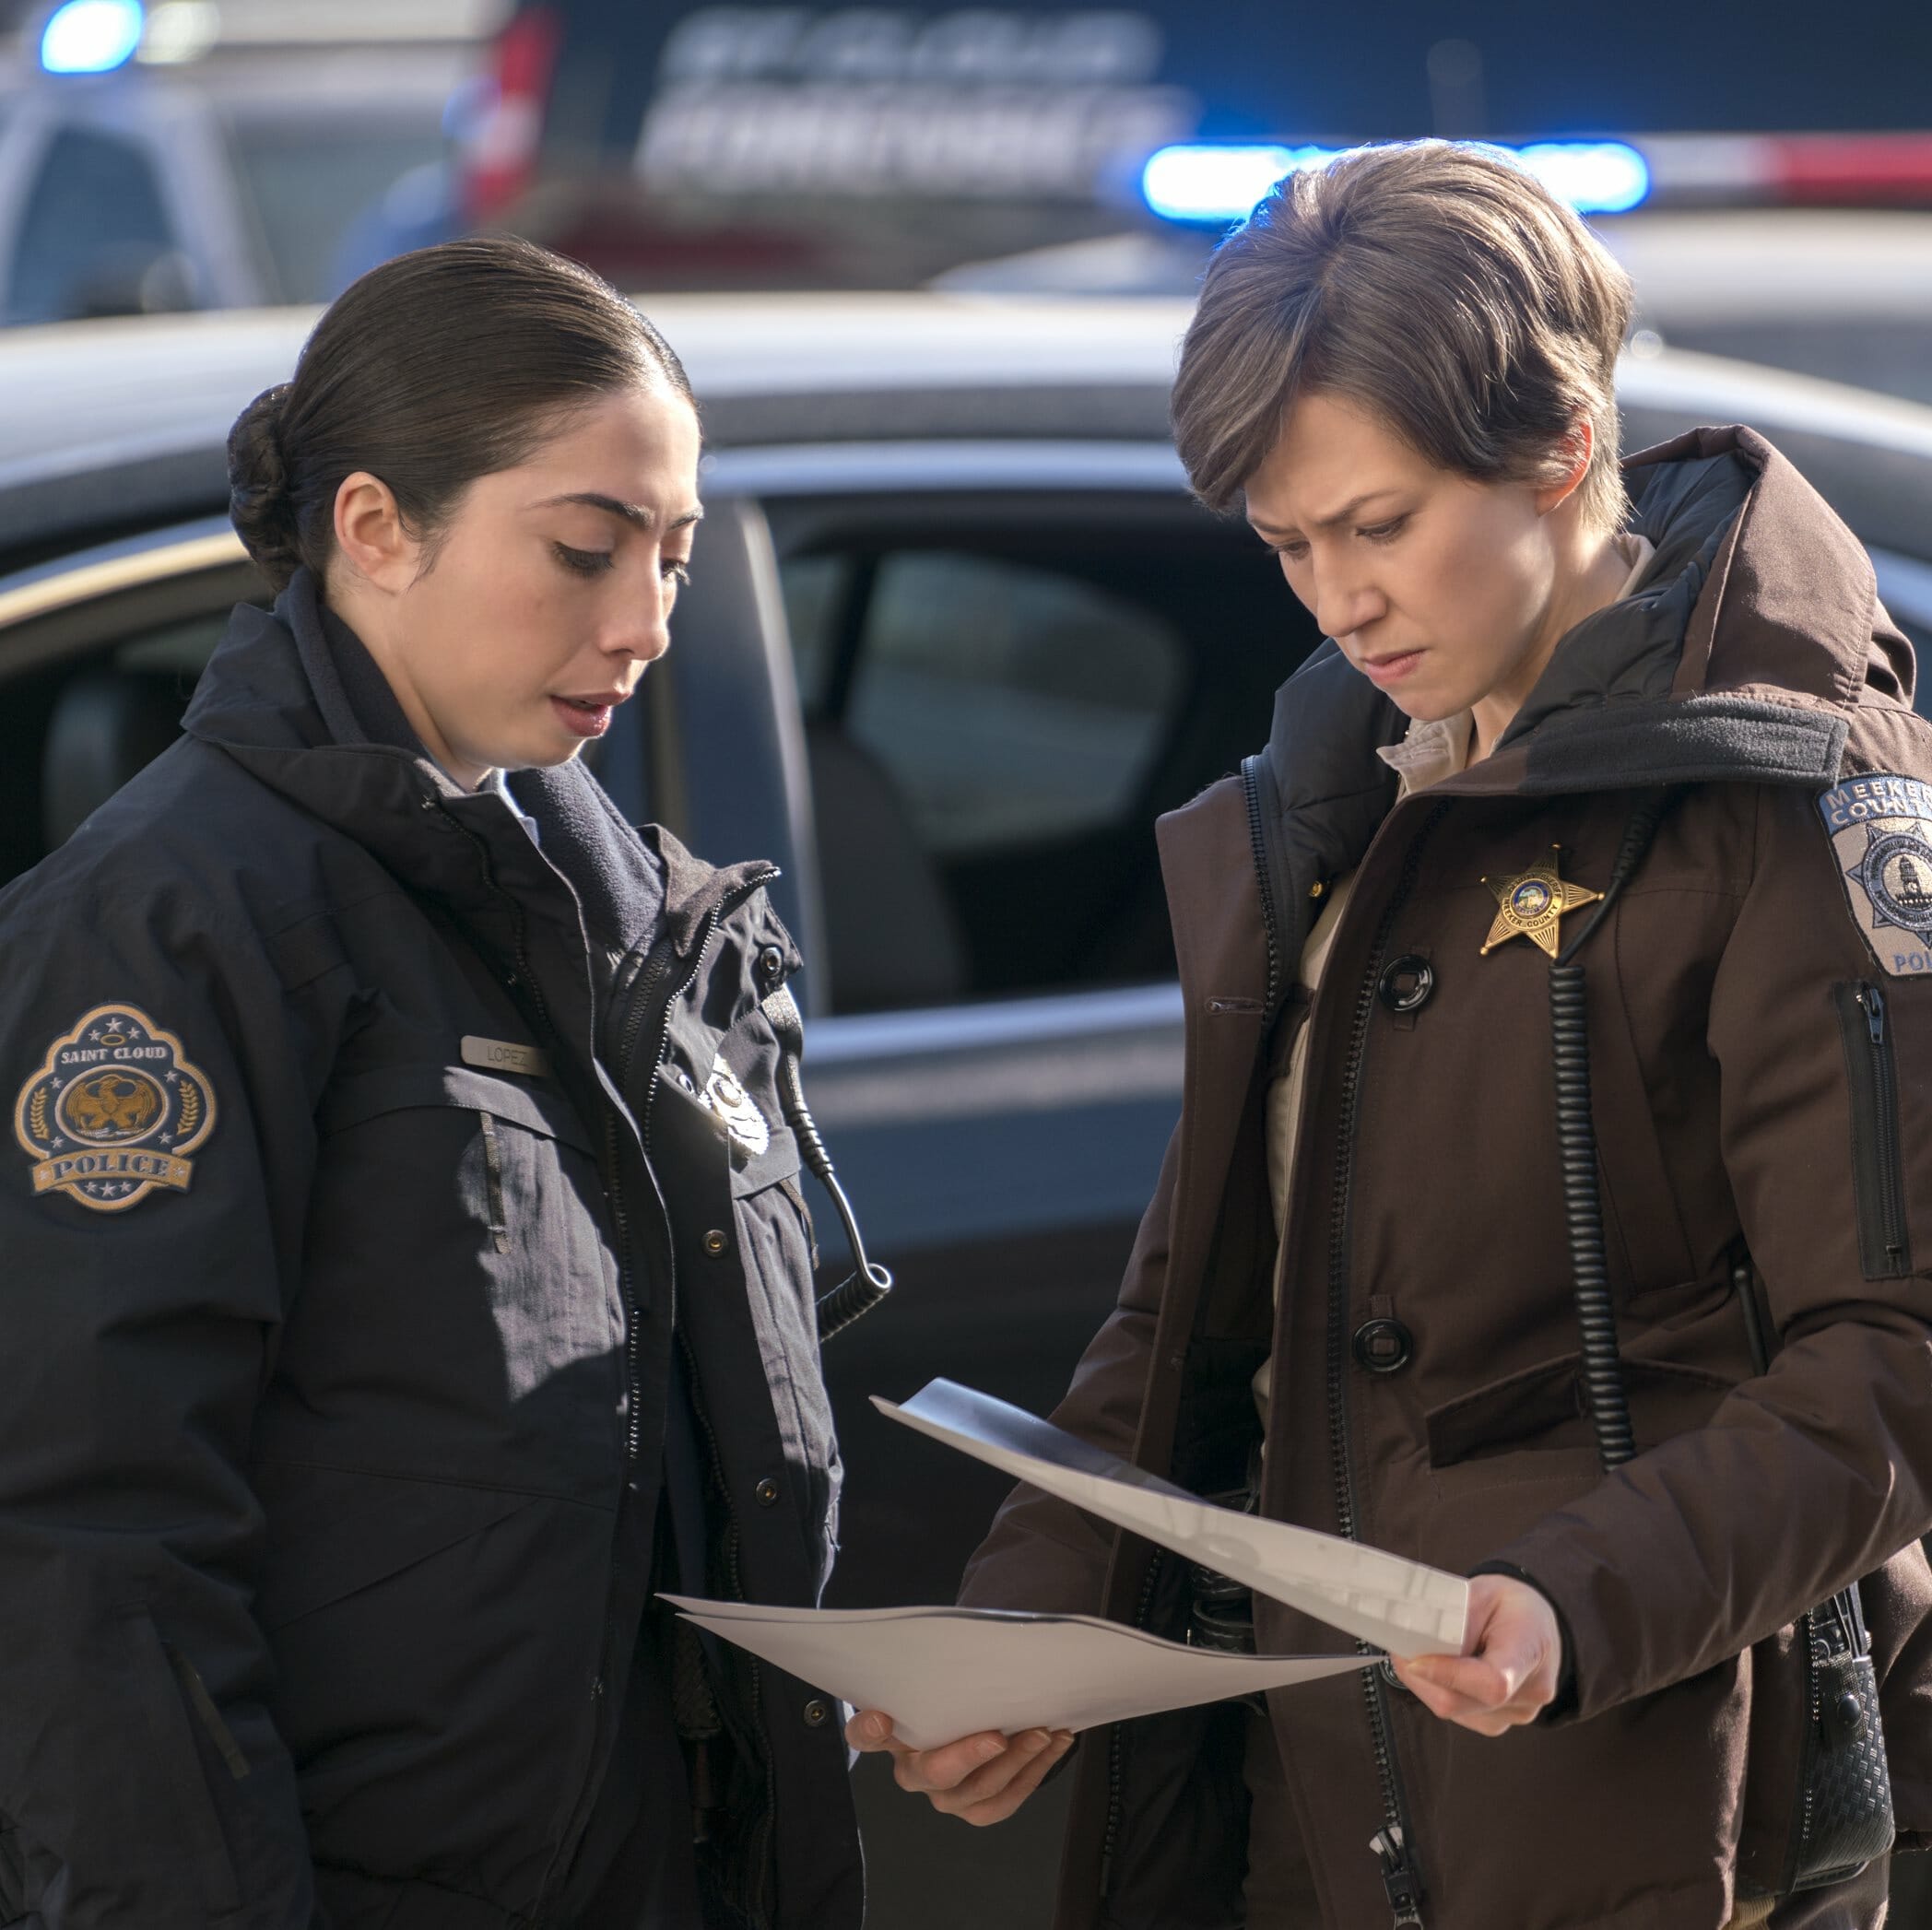 Fargo's Masterful Finale Offers No Easy Answers to the Season's Moral Questions